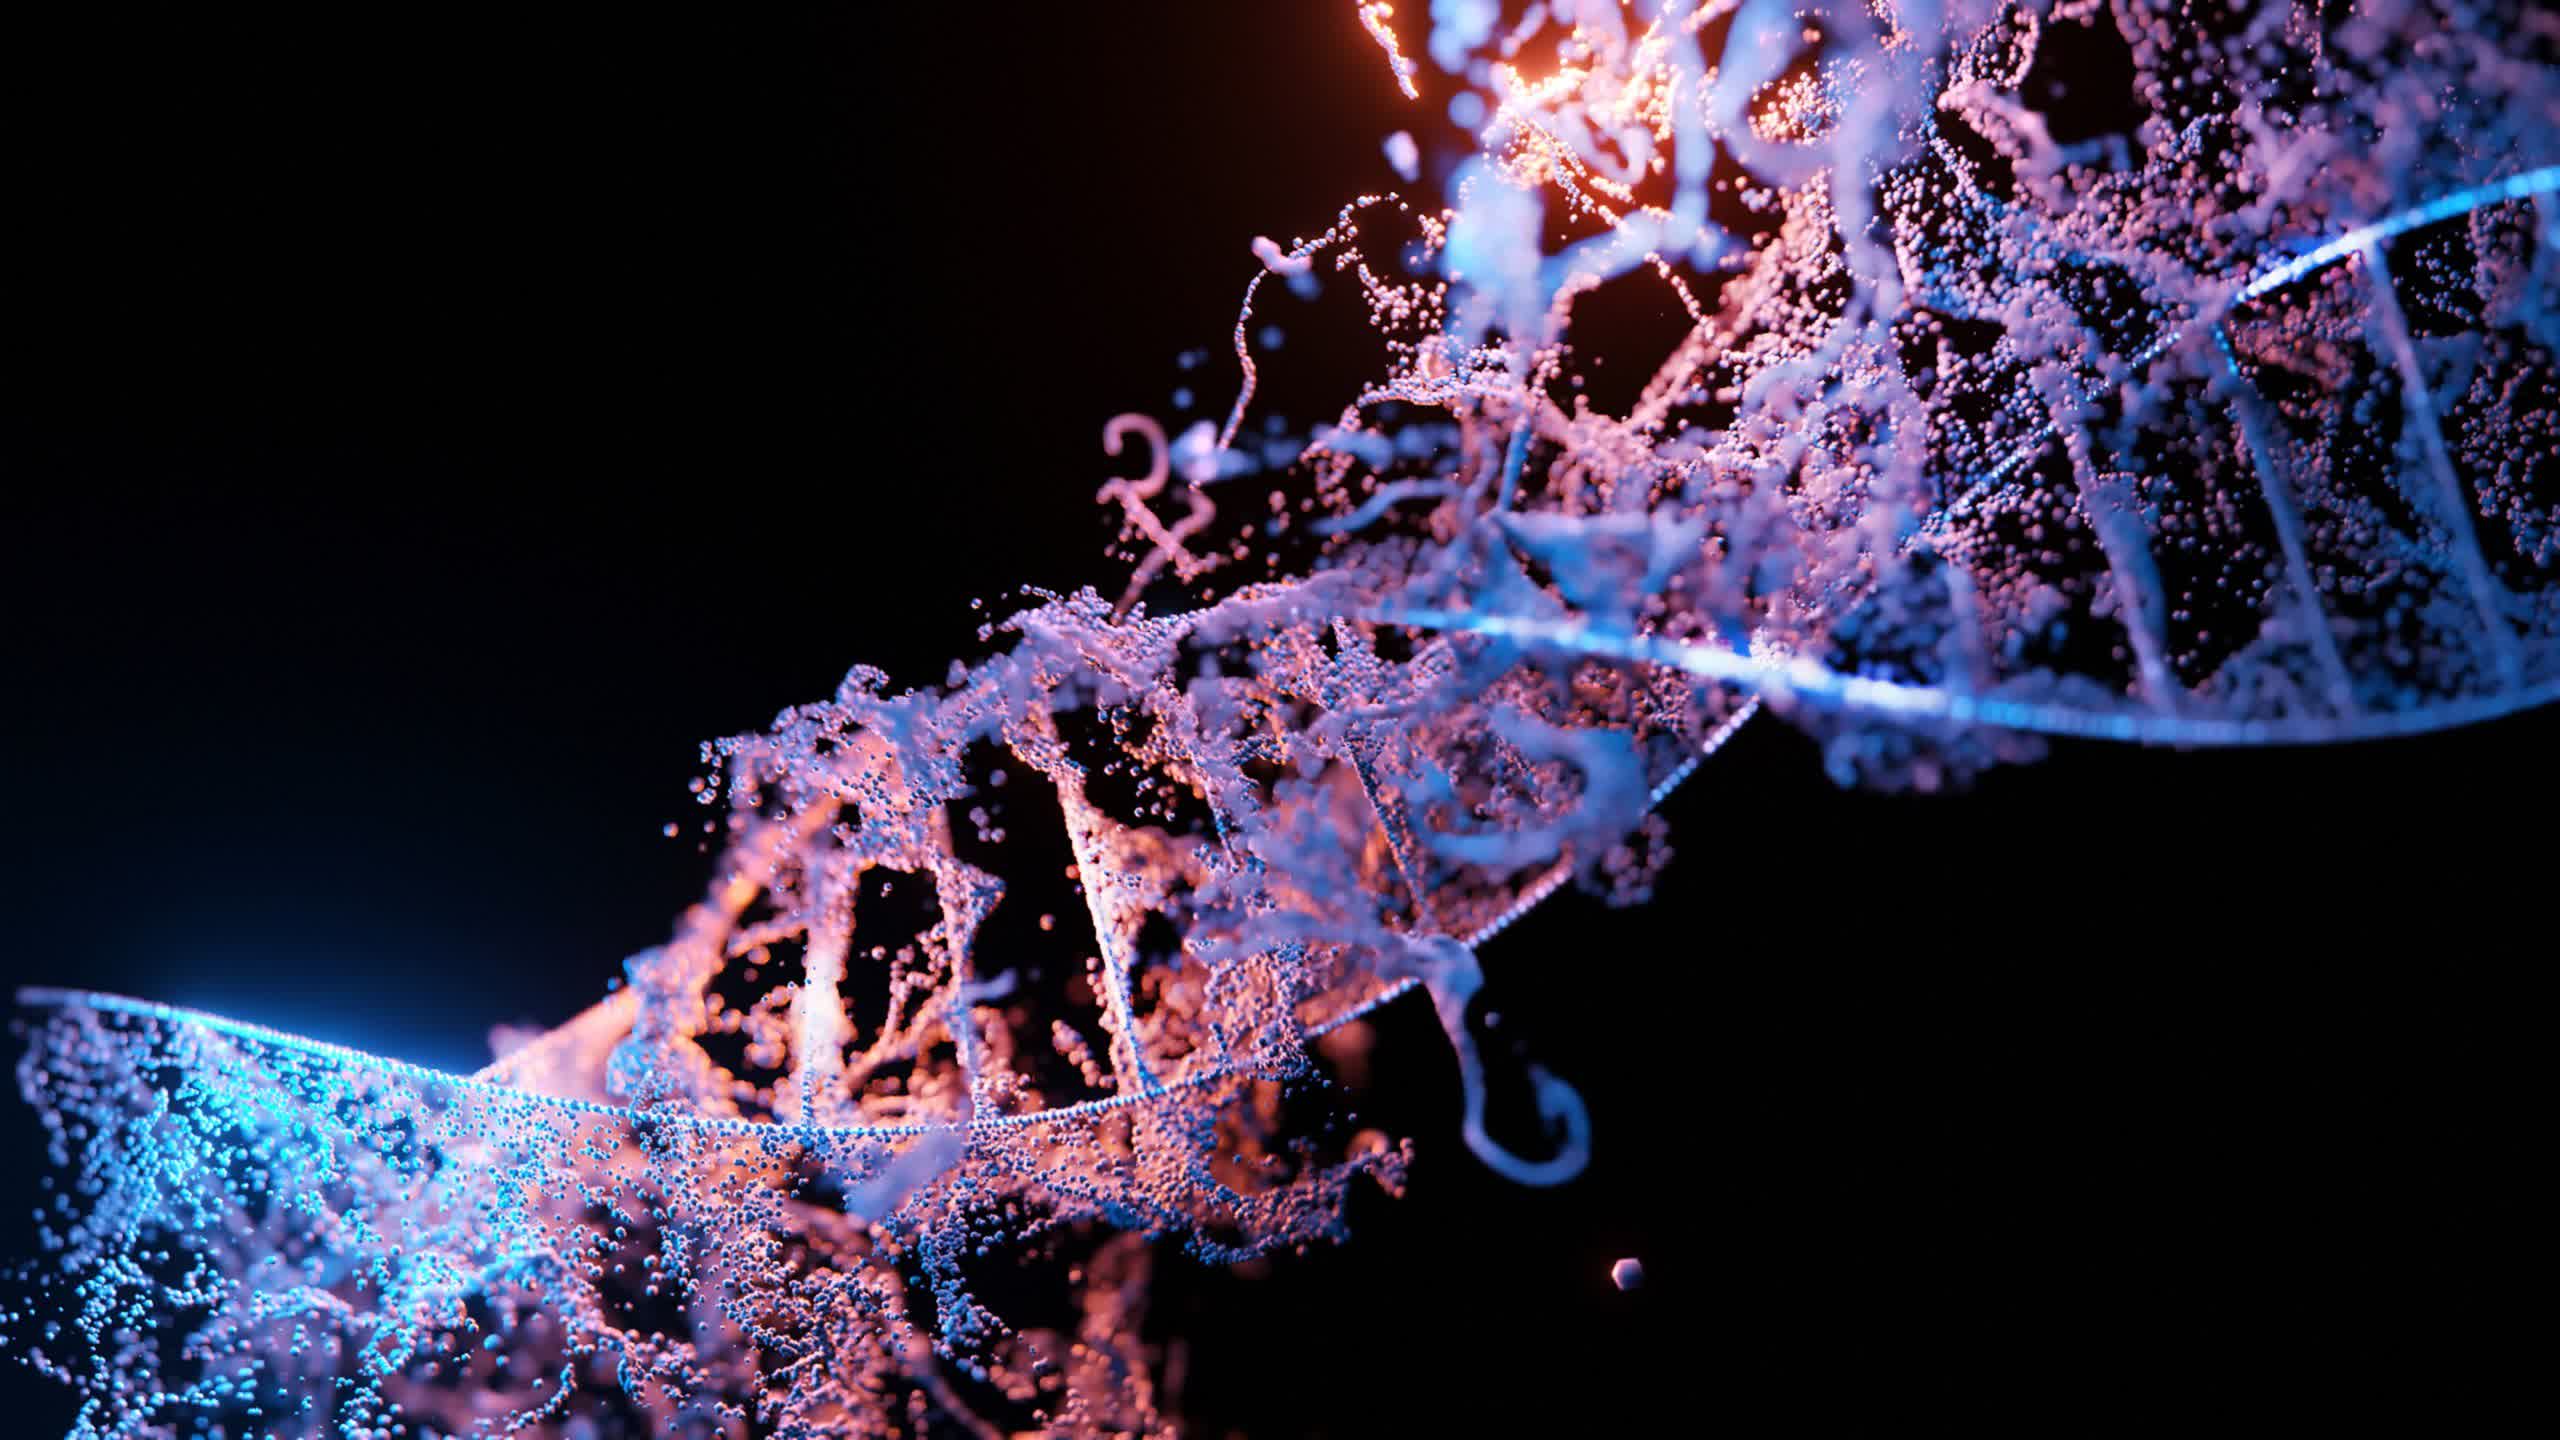 For just $1,000, you can turn your DNA into a flash drive for text messages